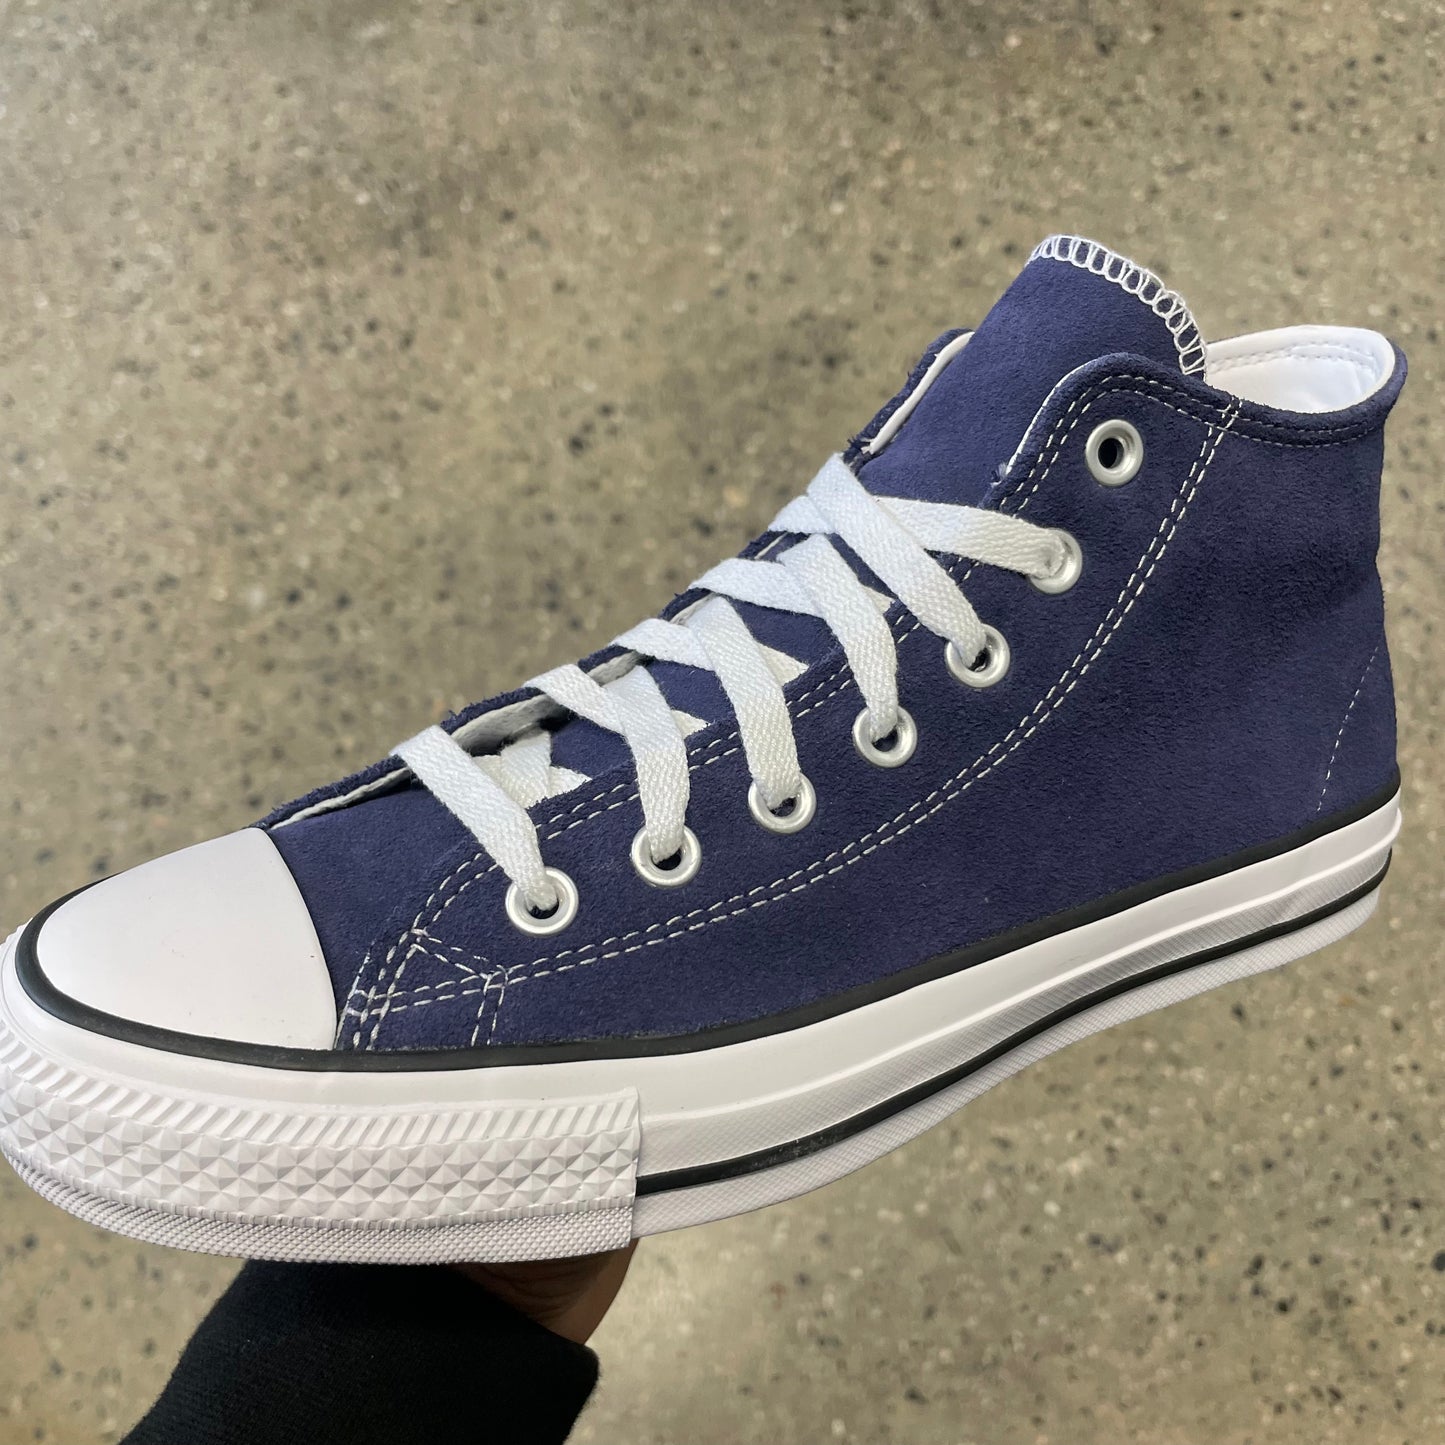 blue suede sneaker with white sole, toe, and stitch, side view